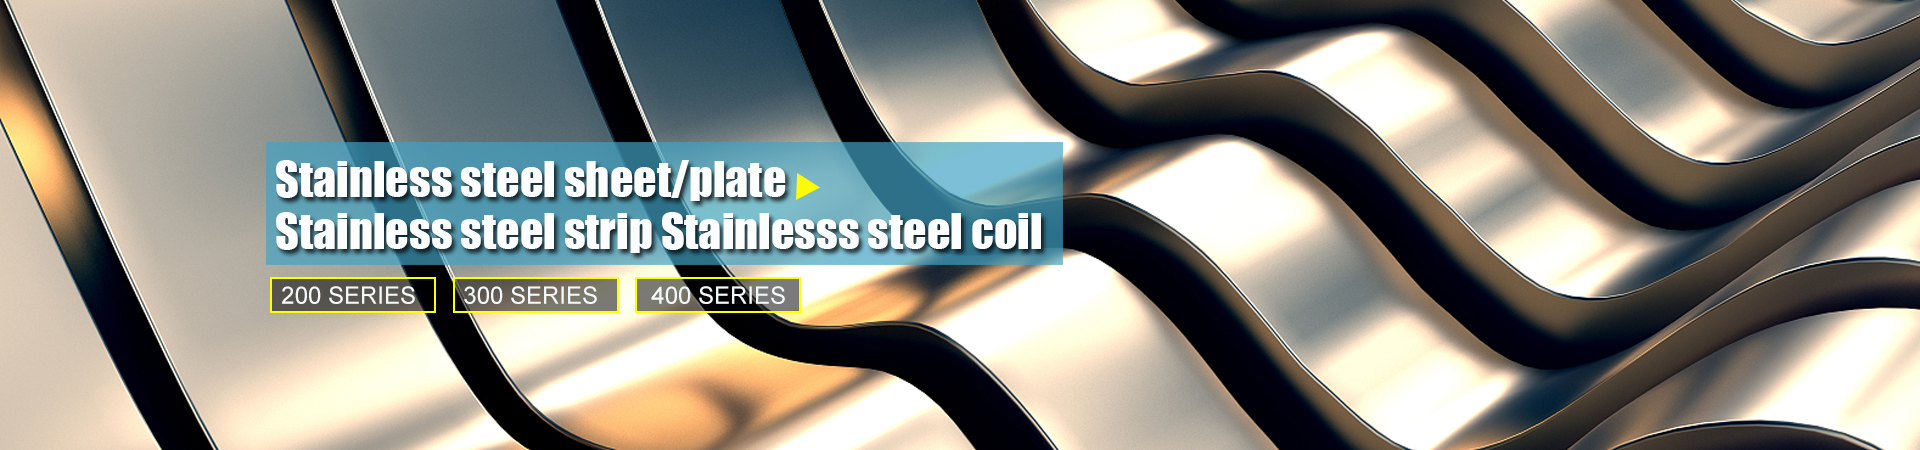 Stainless steel sheet/plate,Stainless steel strip ,Stainless steel coil